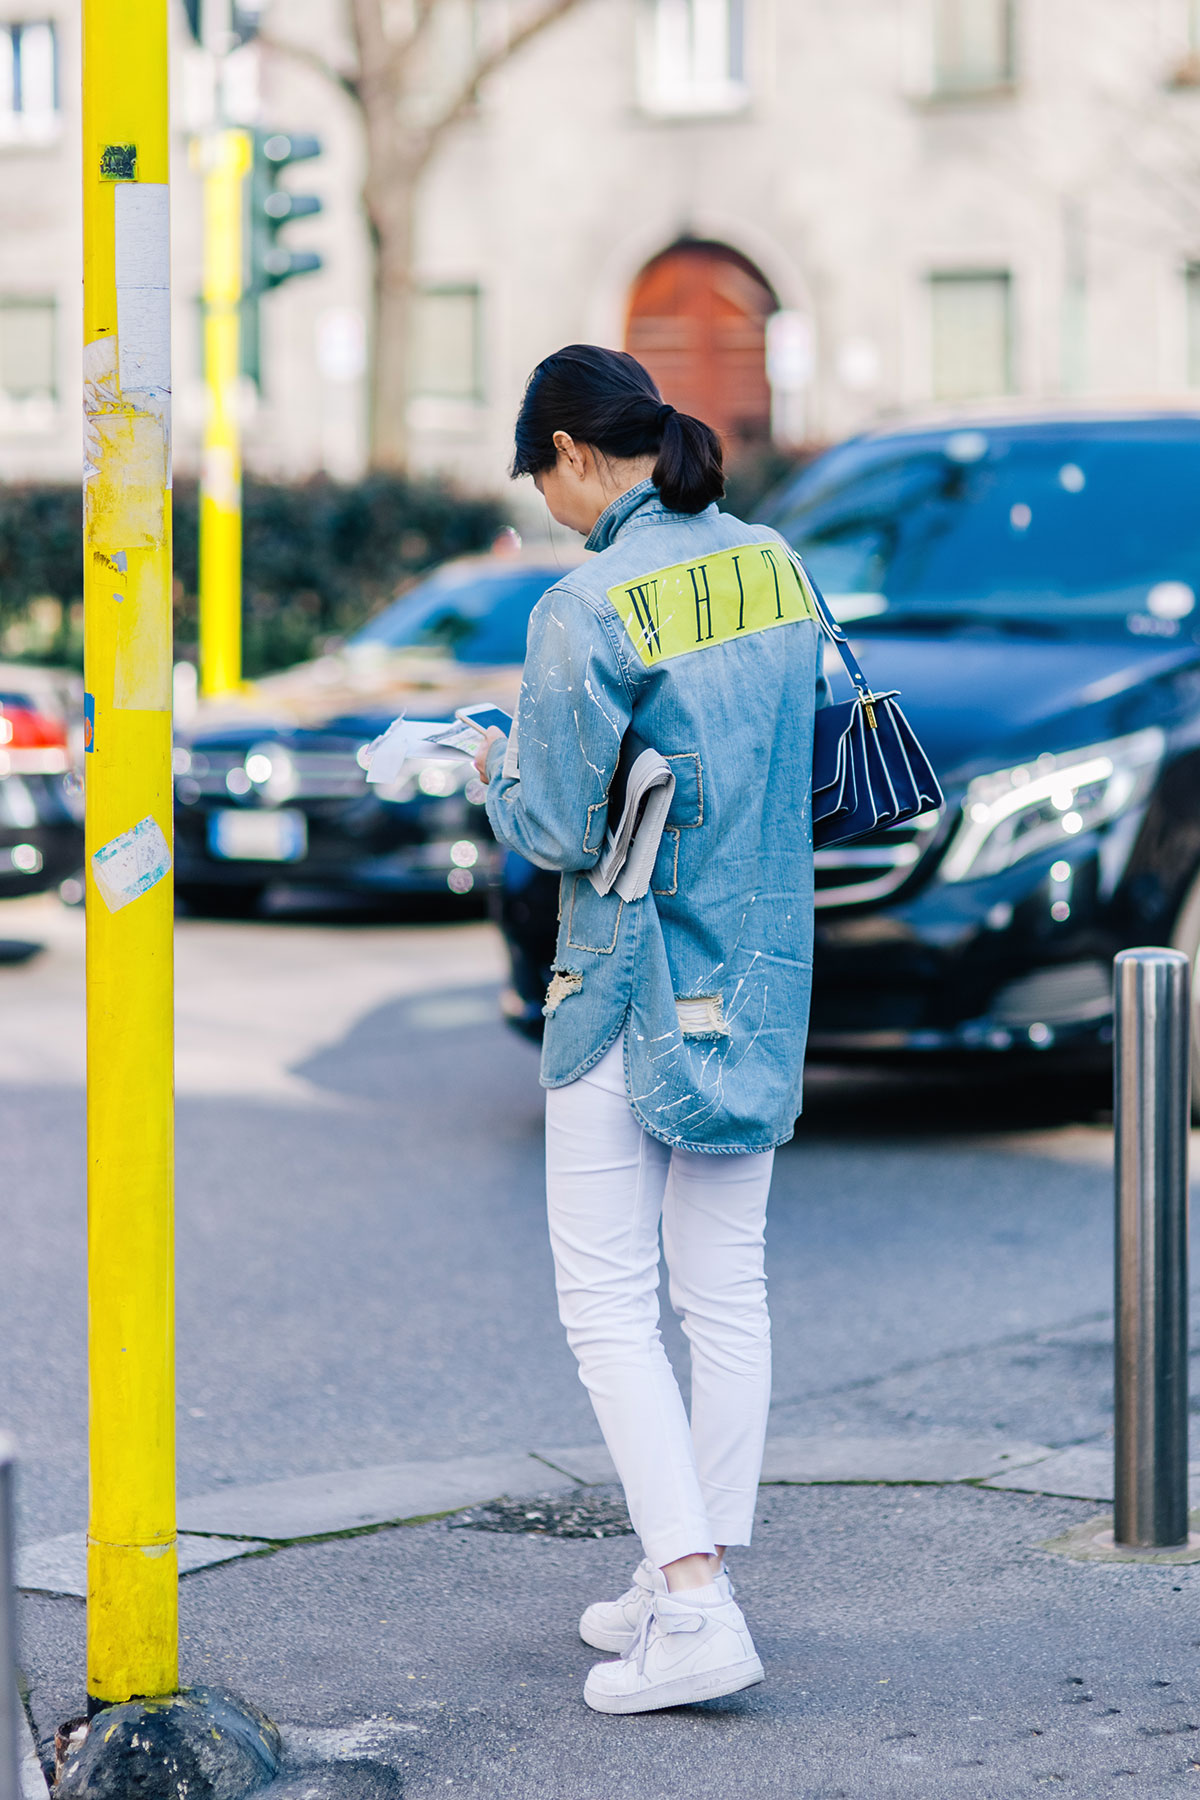 Woman wearing an Off-White denim shirt, white jeans and Nike shoes after the Marni Fall/Winter 2015-2016 fashion show in Milan, Italy